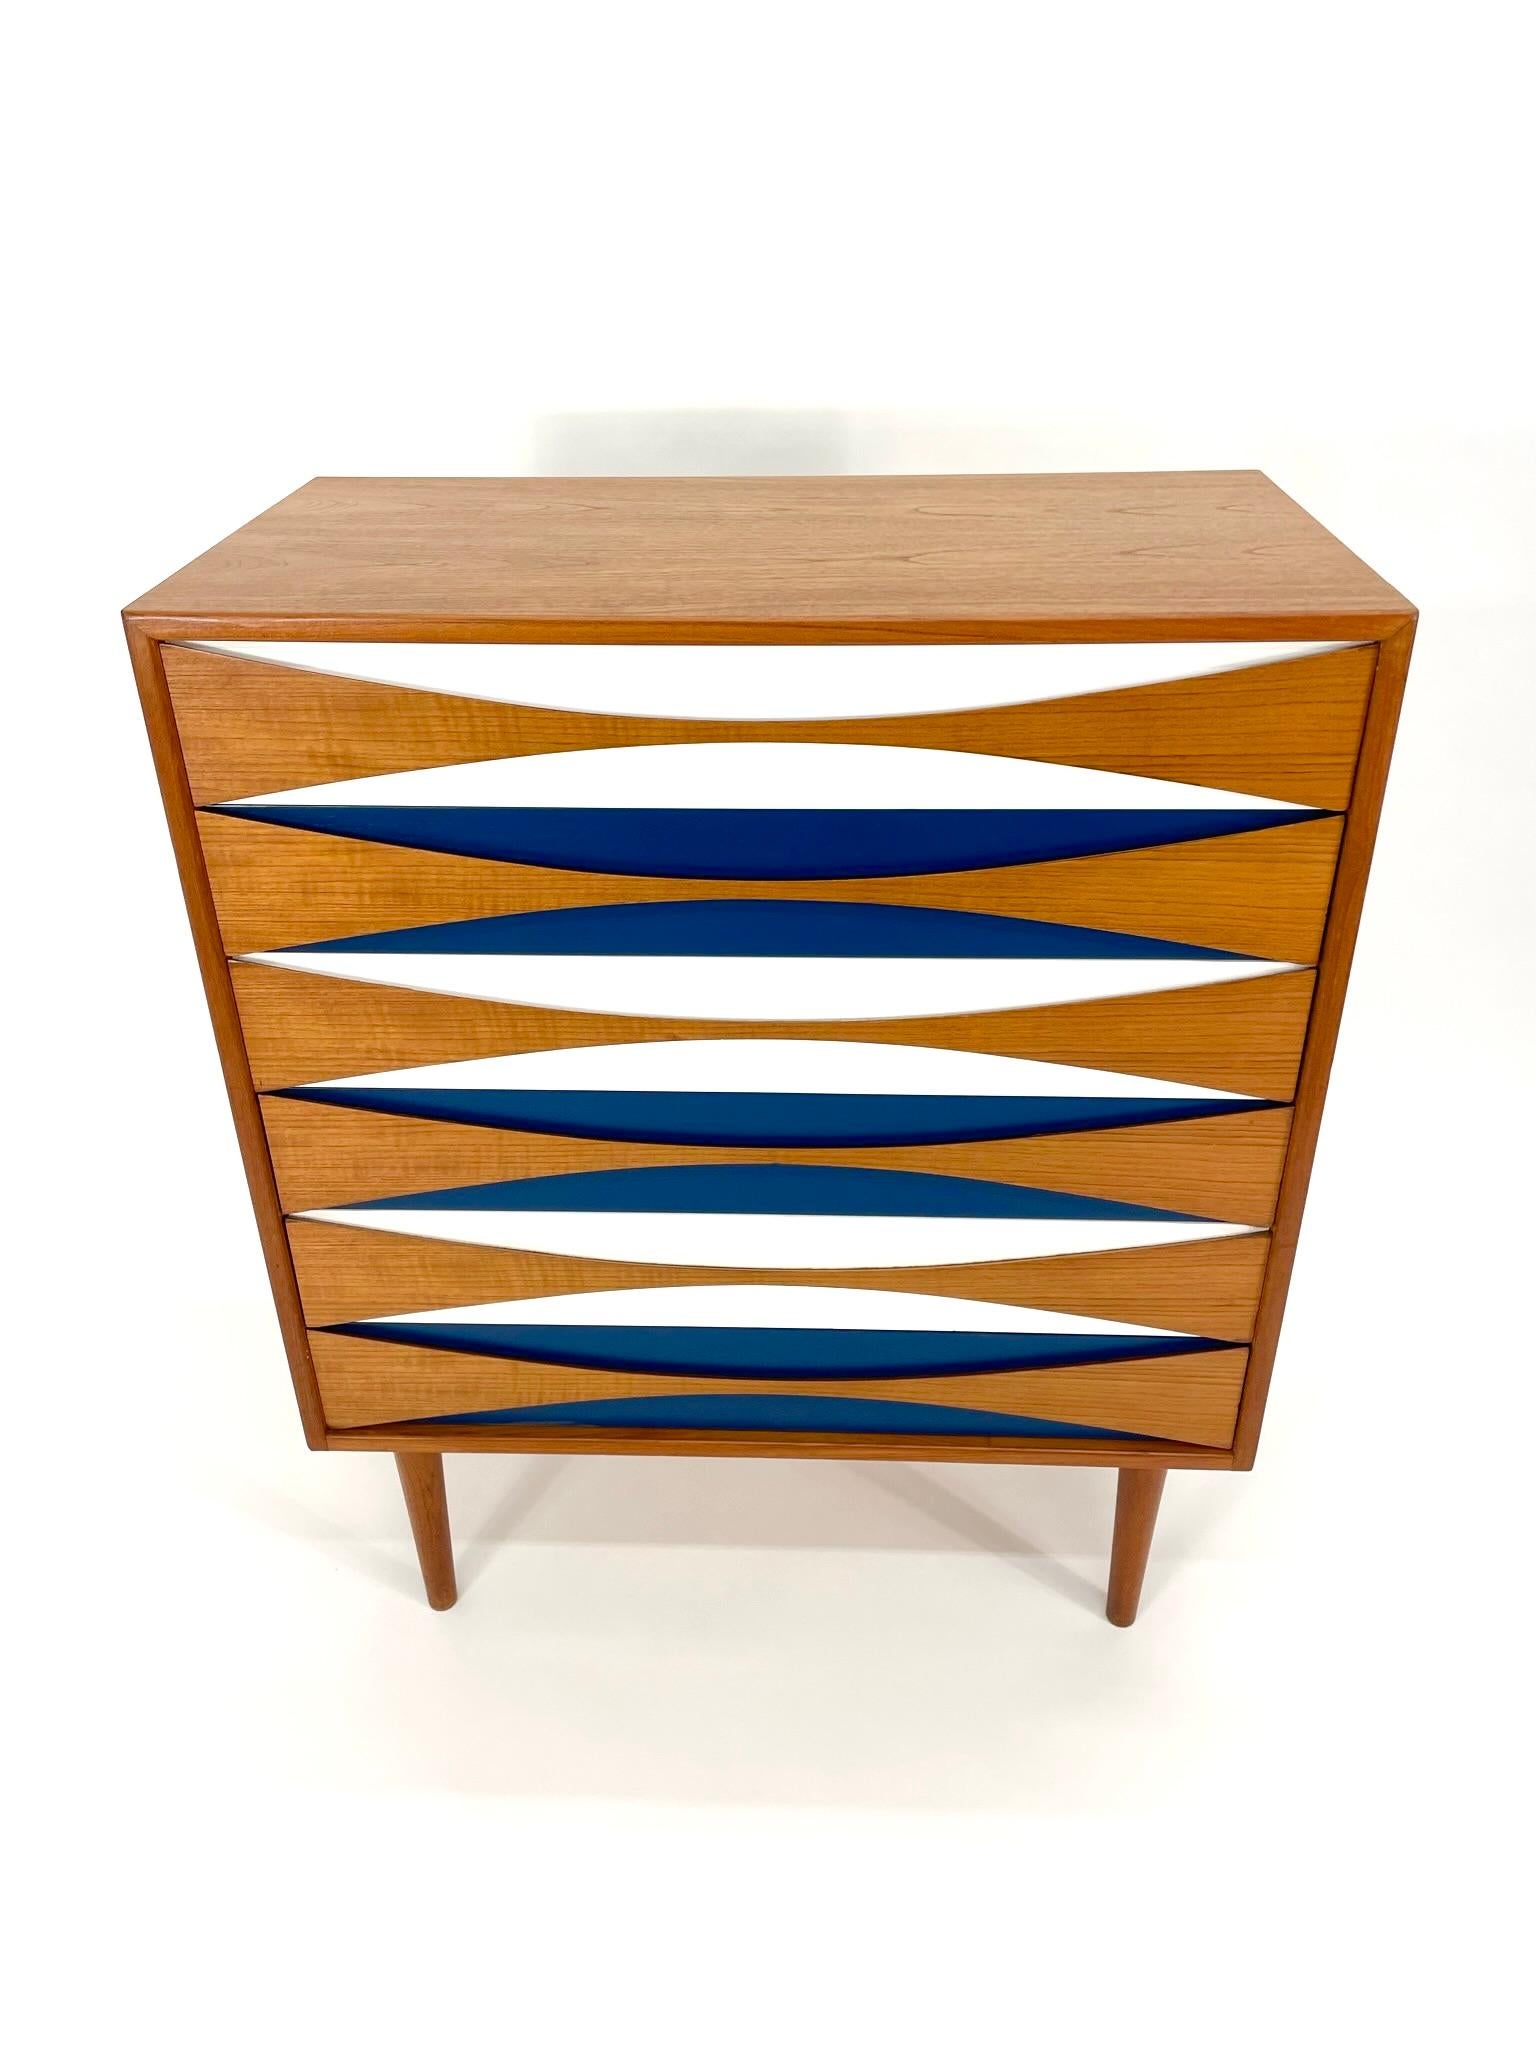 Niels Clausen Teak and Oak Tallboy Dresser with Blue and White, circa 1960s. Features sculpted “Bow tie” front drawers made of teak with solid teak drawers and blue and white paint to add a pop of color. Colorful furniture pieces became a staple in